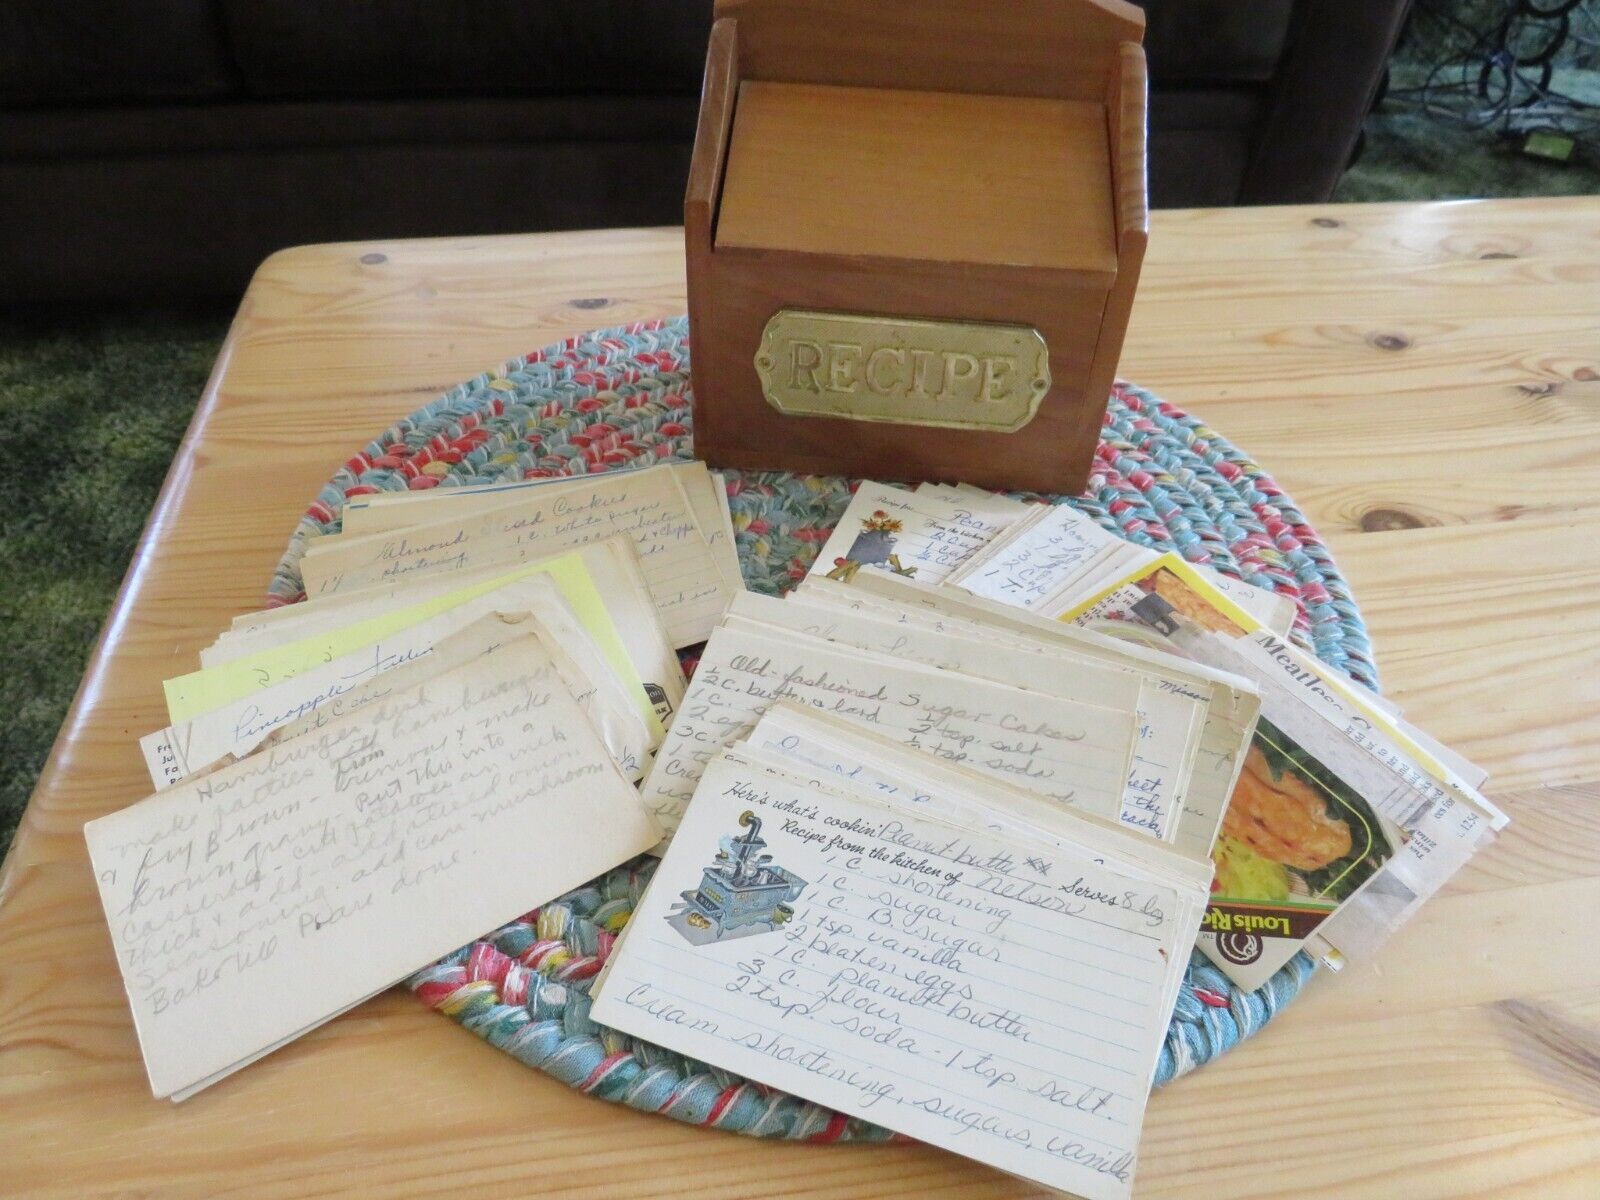 Vintage Giftcraft Wood Recipe Box with Brass Label + Handwritten Recipes